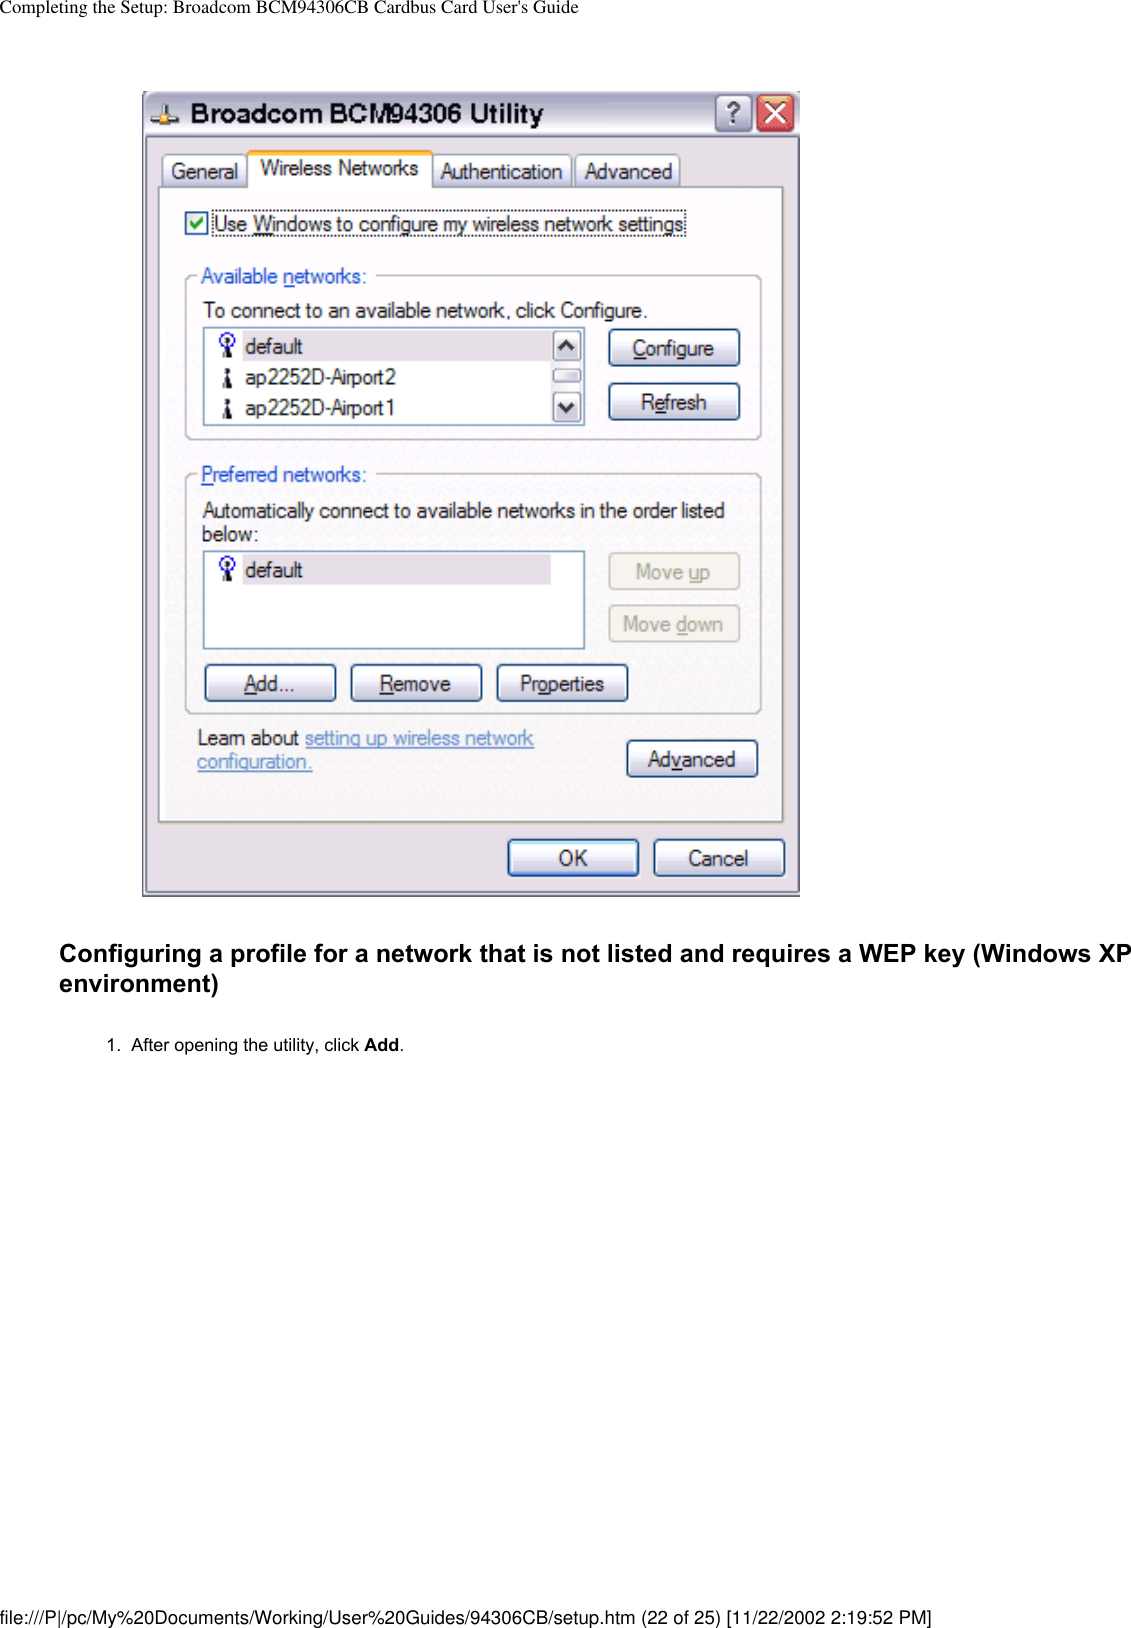 Completing the Setup: Broadcom BCM94306CB Cardbus Card User&apos;s GuideConfiguring a profile for a network that is not listed and requires a WEP key (Windows XP environment)1.  After opening the utility, click Add. file:///P|/pc/My%20Documents/Working/User%20Guides/94306CB/setup.htm (22 of 25) [11/22/2002 2:19:52 PM]